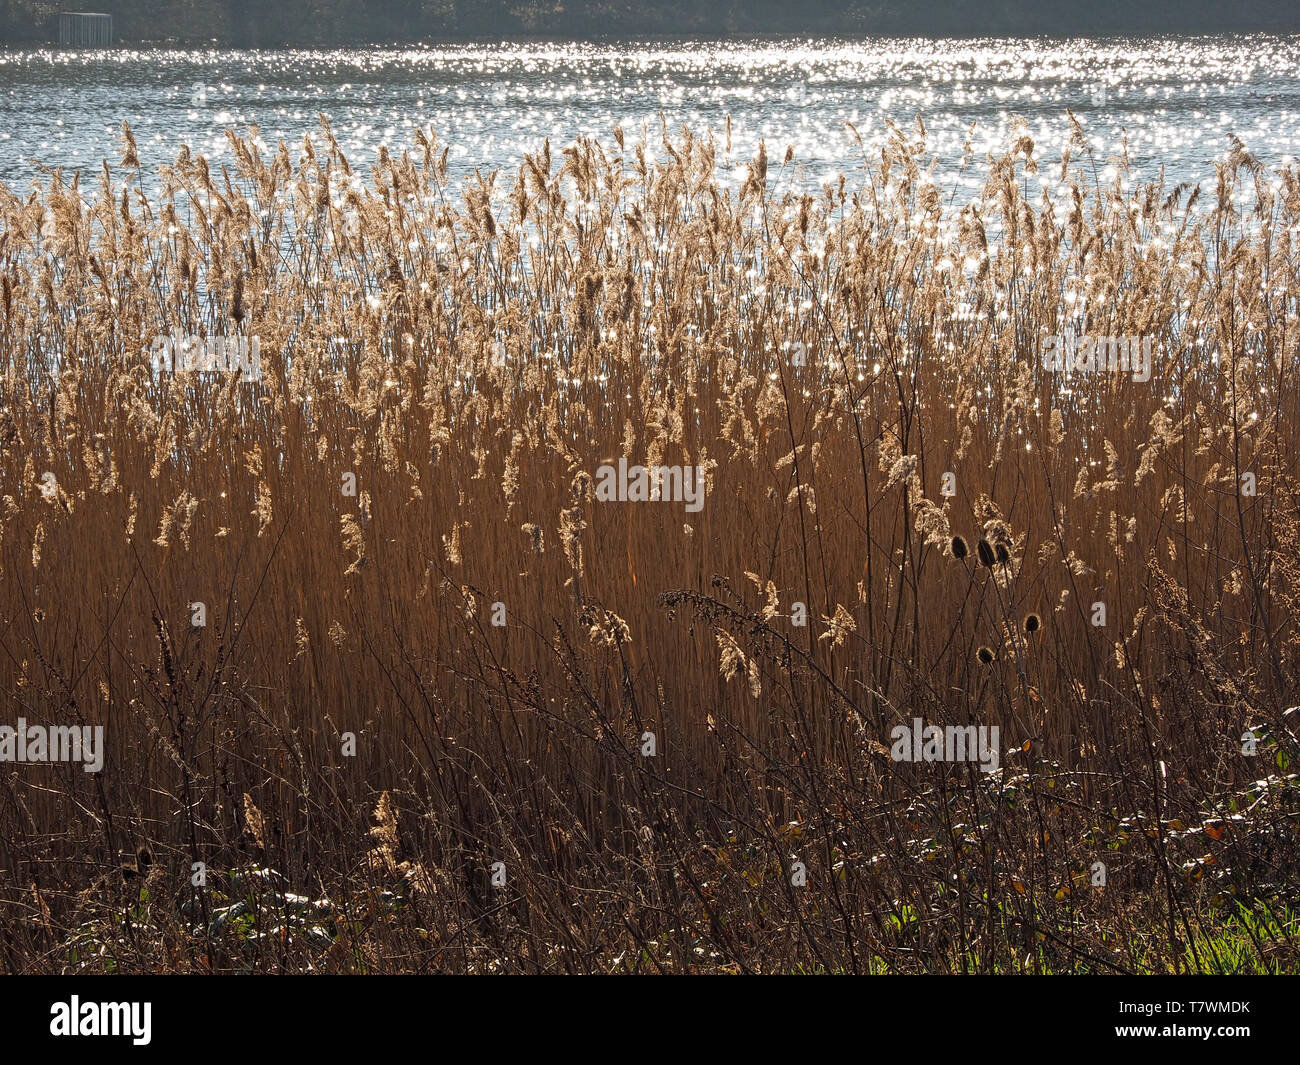 Bright sunshine on fluffy seed-heads of reed-bed with glittering watery background creates high-key environmental landscape in West Yorkshire England Stock Photo